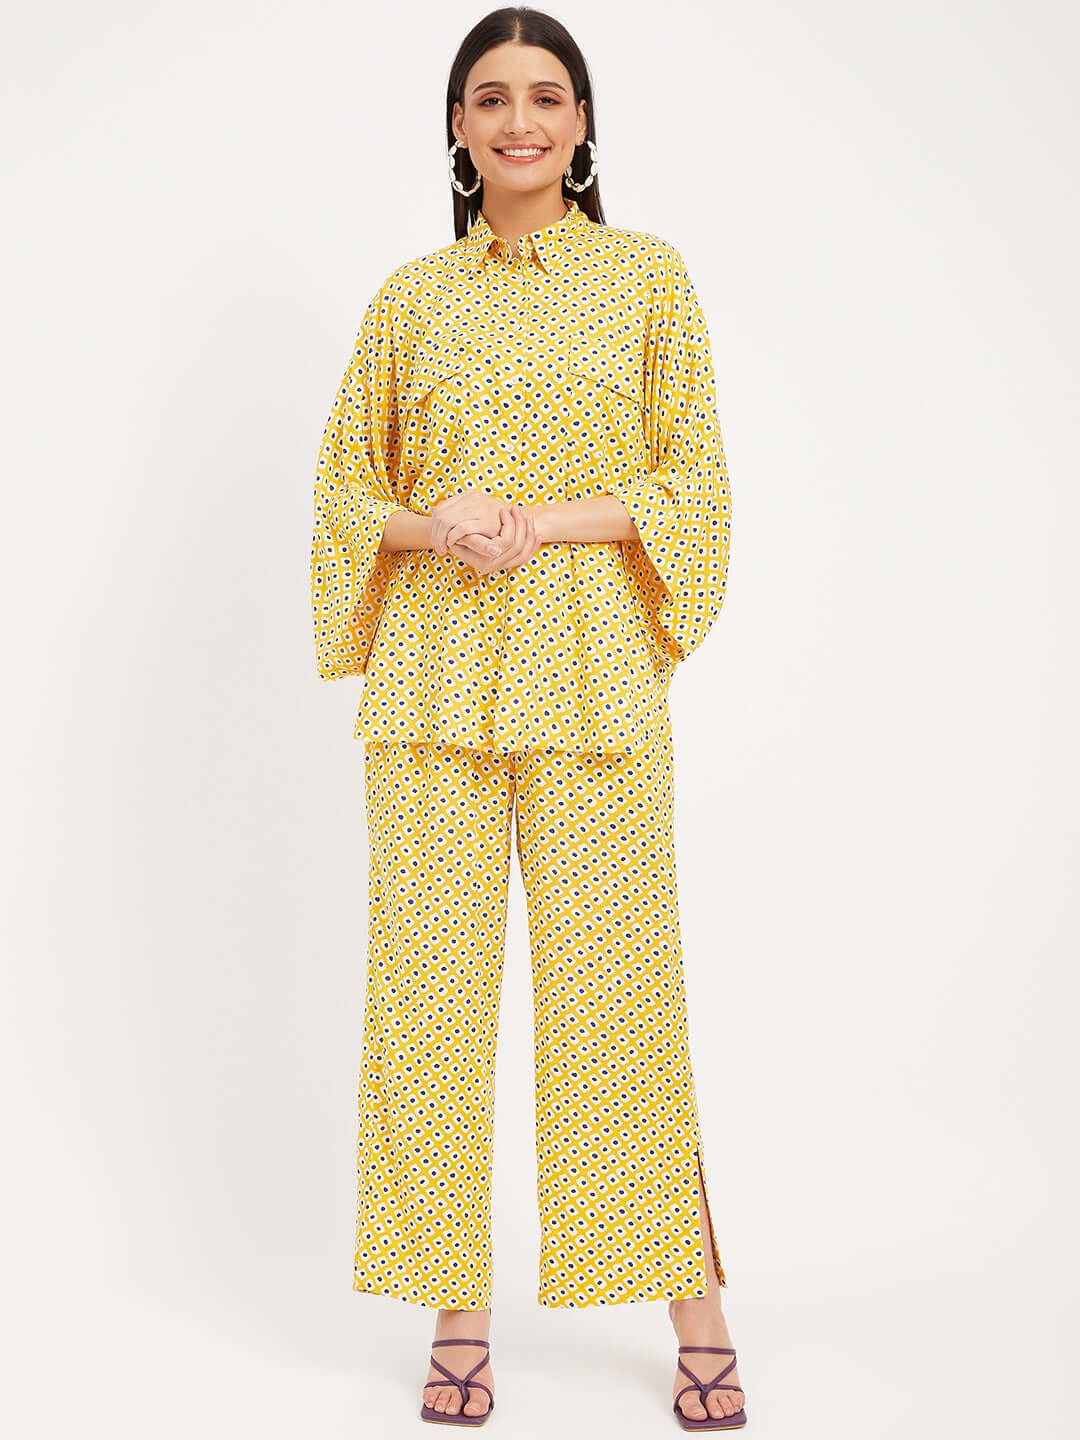 YELLOW PRINTED CO-ORD SETS | FREE SIZE - Antimony